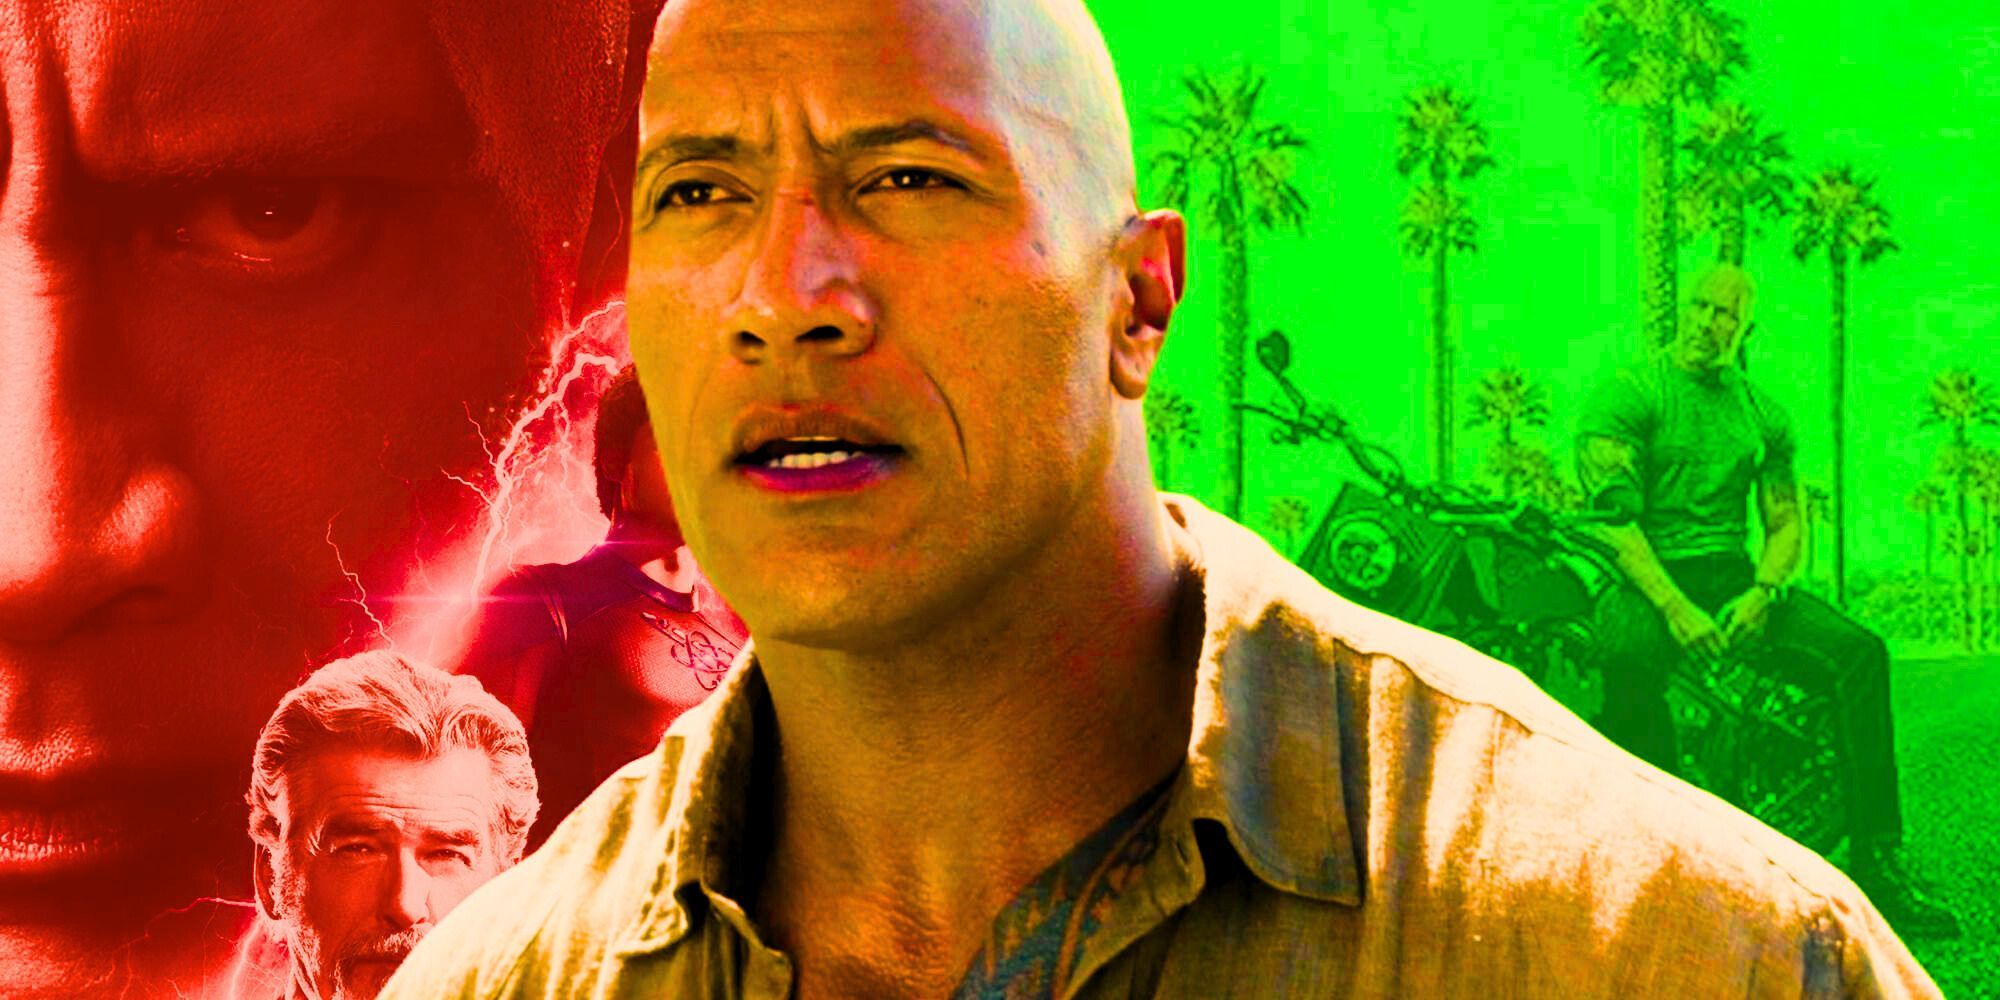 Dwayne Johnson in Jumanji against a backdrop of Black Adam and Fast & Furious